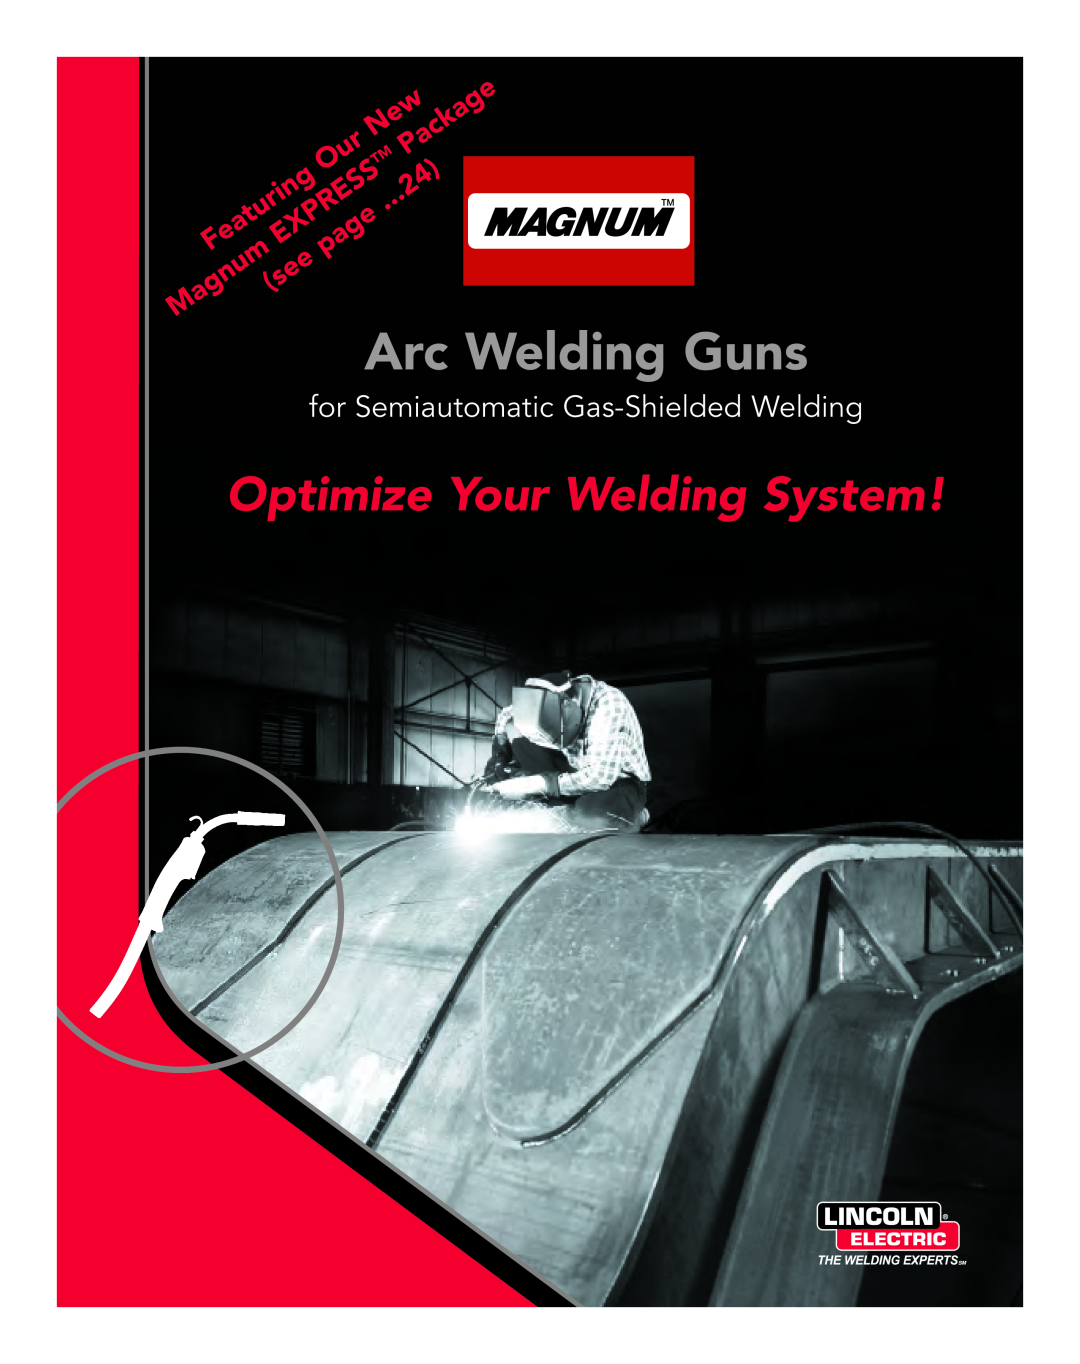 Lincoln Electric Magnum manual Arc Welding Guns, Optimize Your Welding System, for Semiautomatic Gas-Shielded Welding 